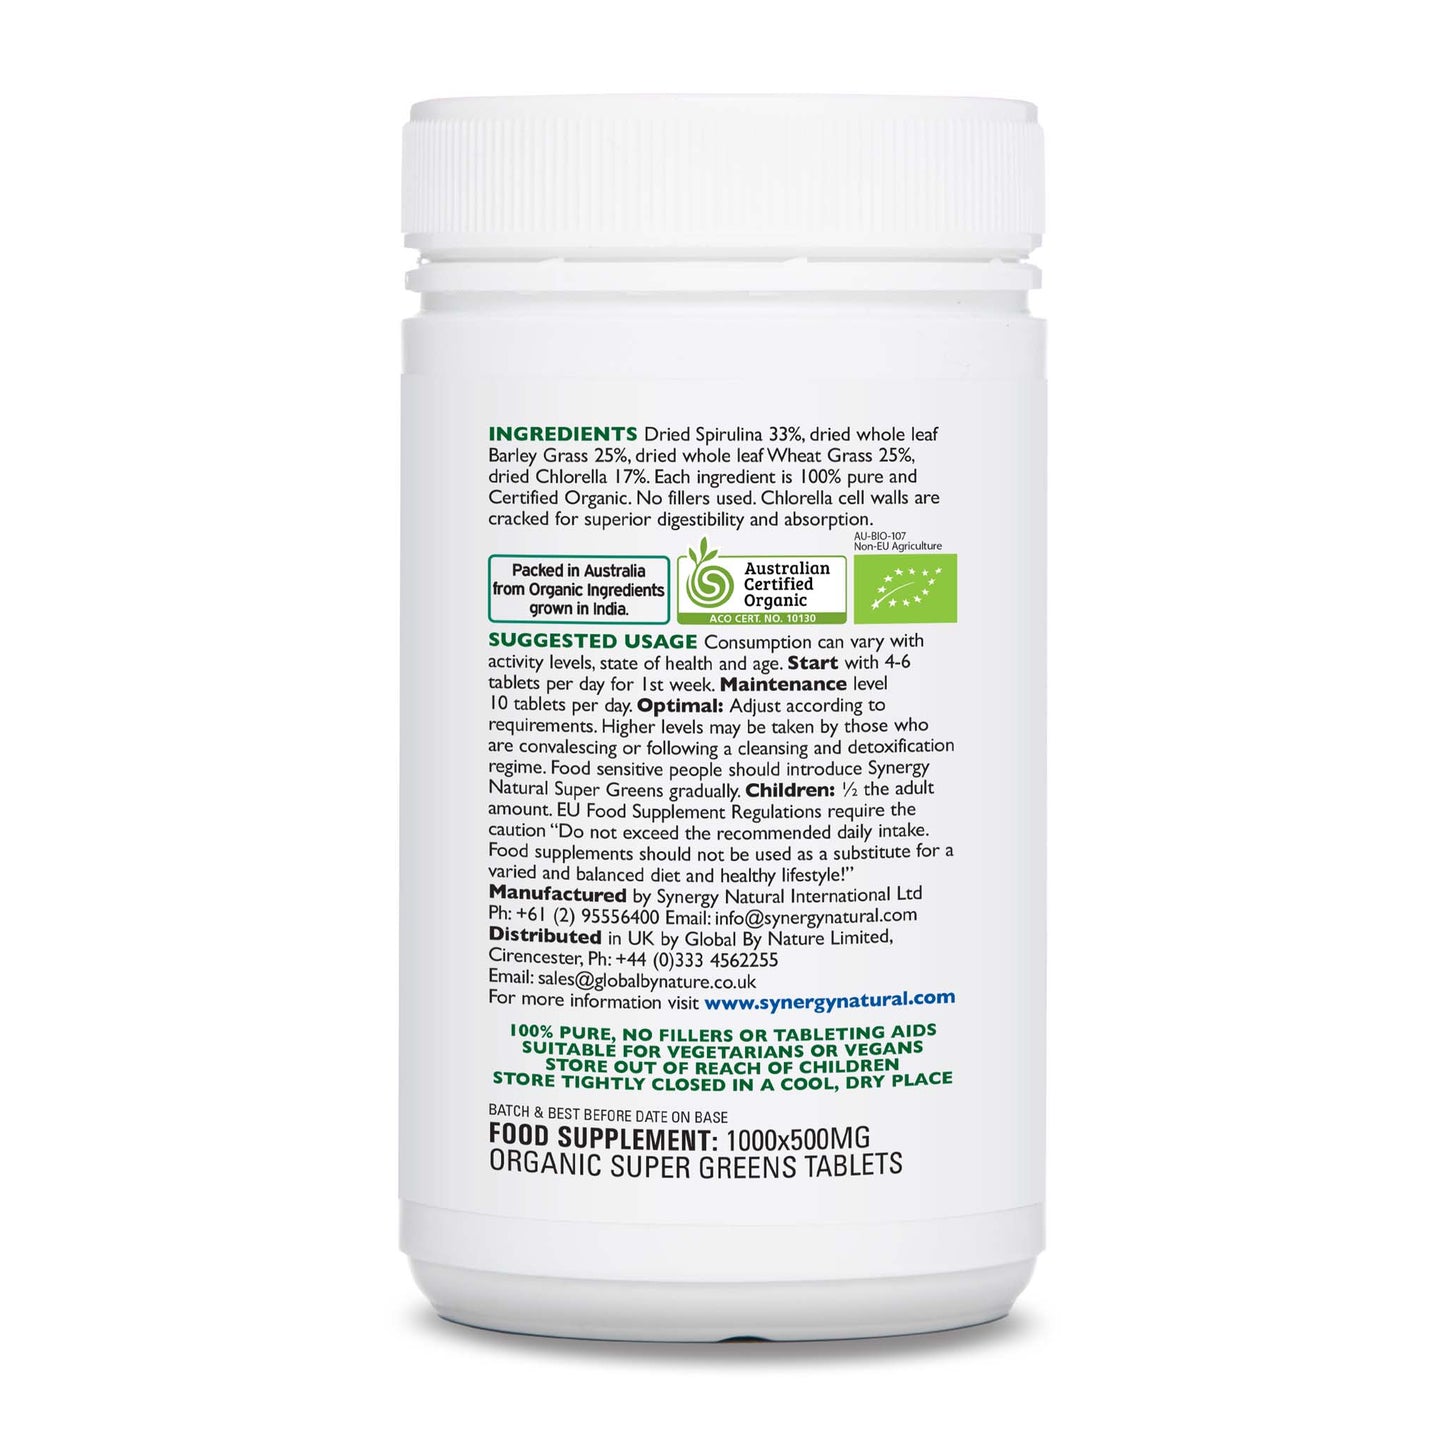 Synergy Natural Organic Super Greens 1000 Tablets